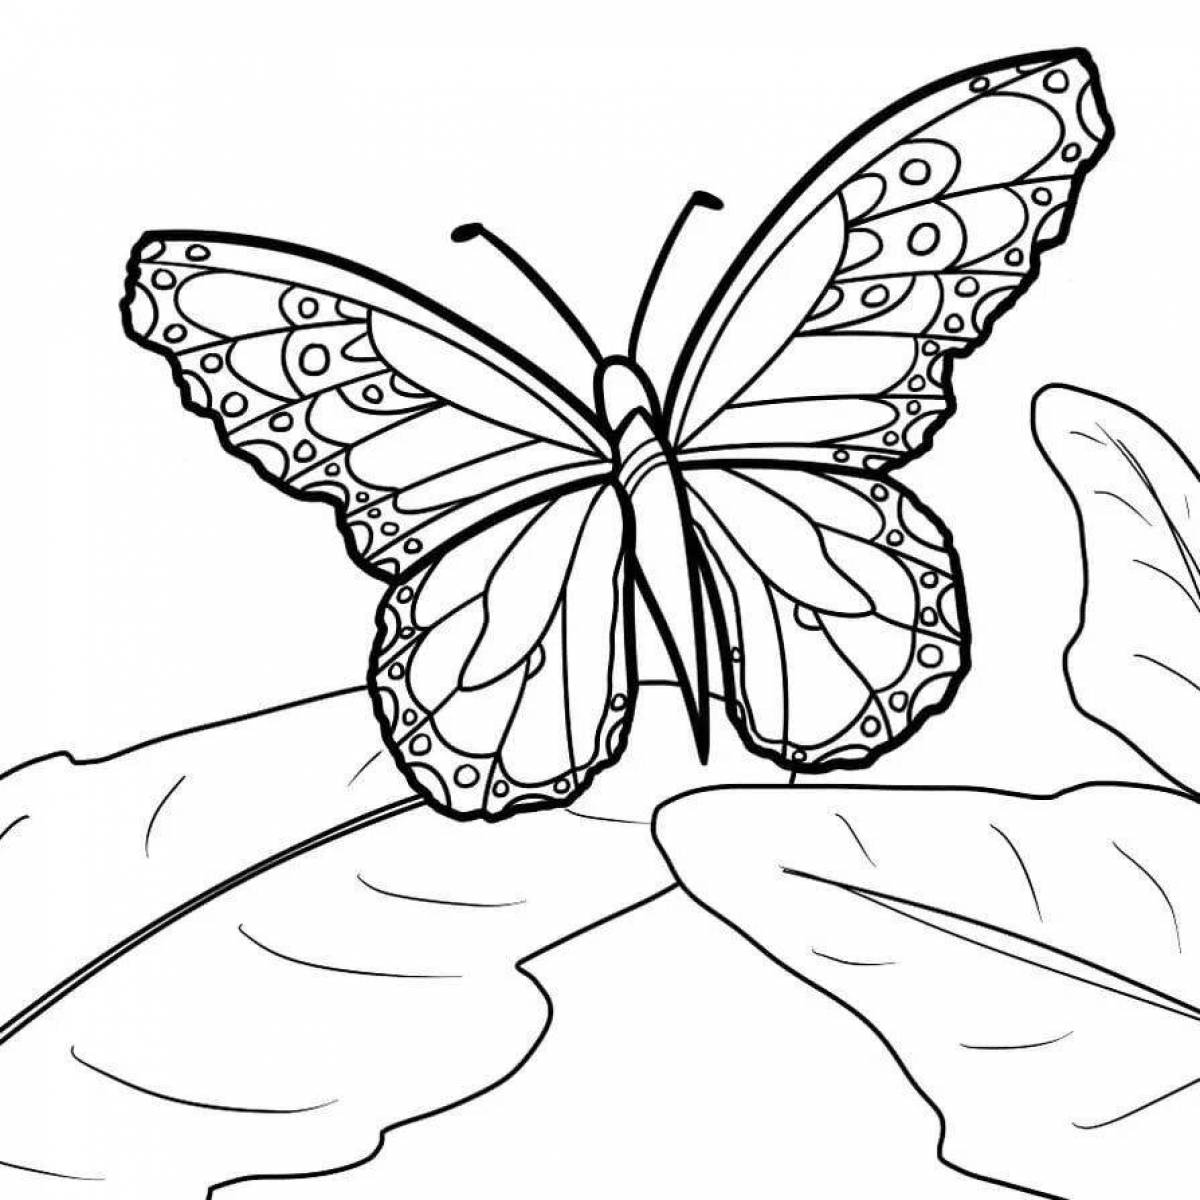 Radiant coloring page beautiful for kids